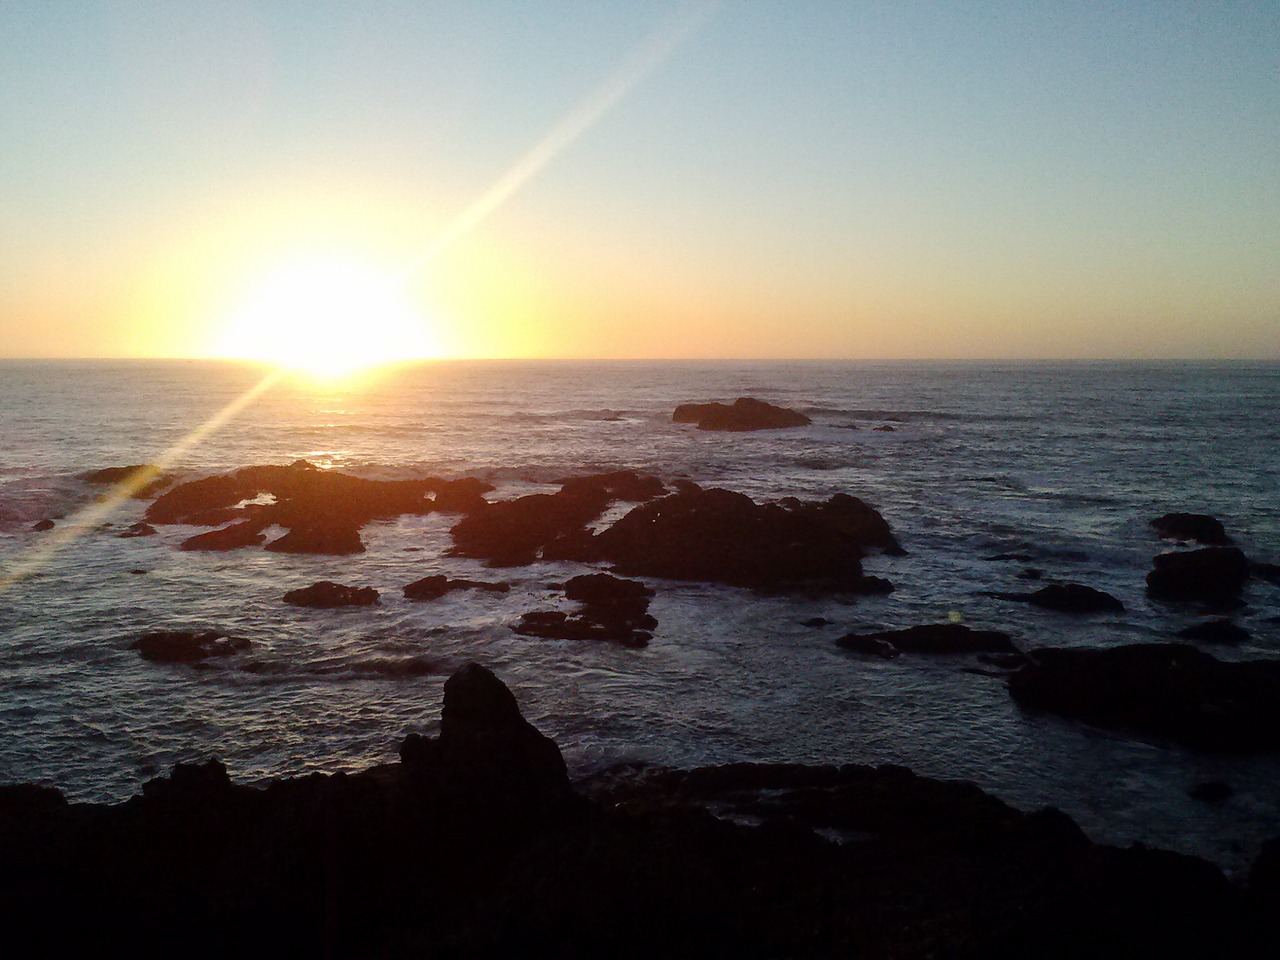 Pacific sunset from Pidgeon Point along the Pacific Coast Highway.